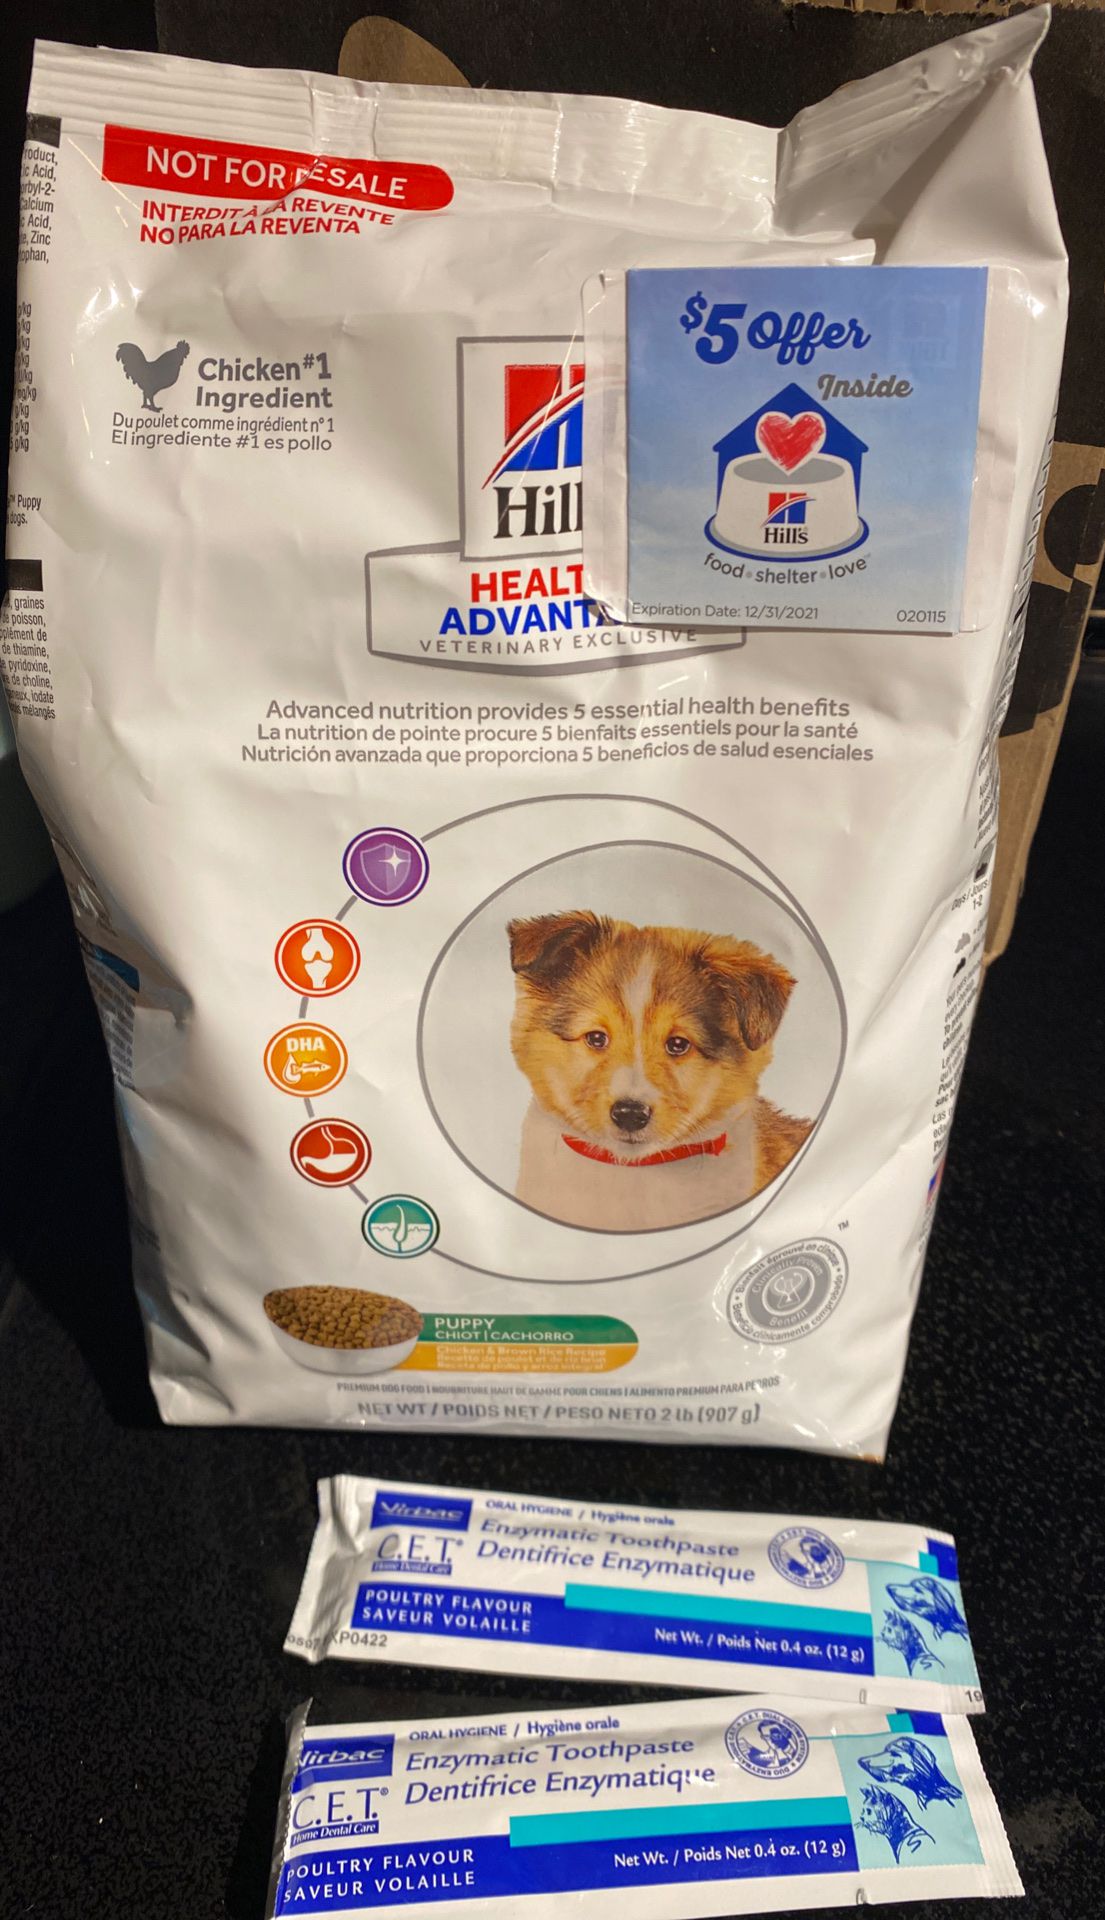 Free puppy welcome bag (puppy food and toothpaste)